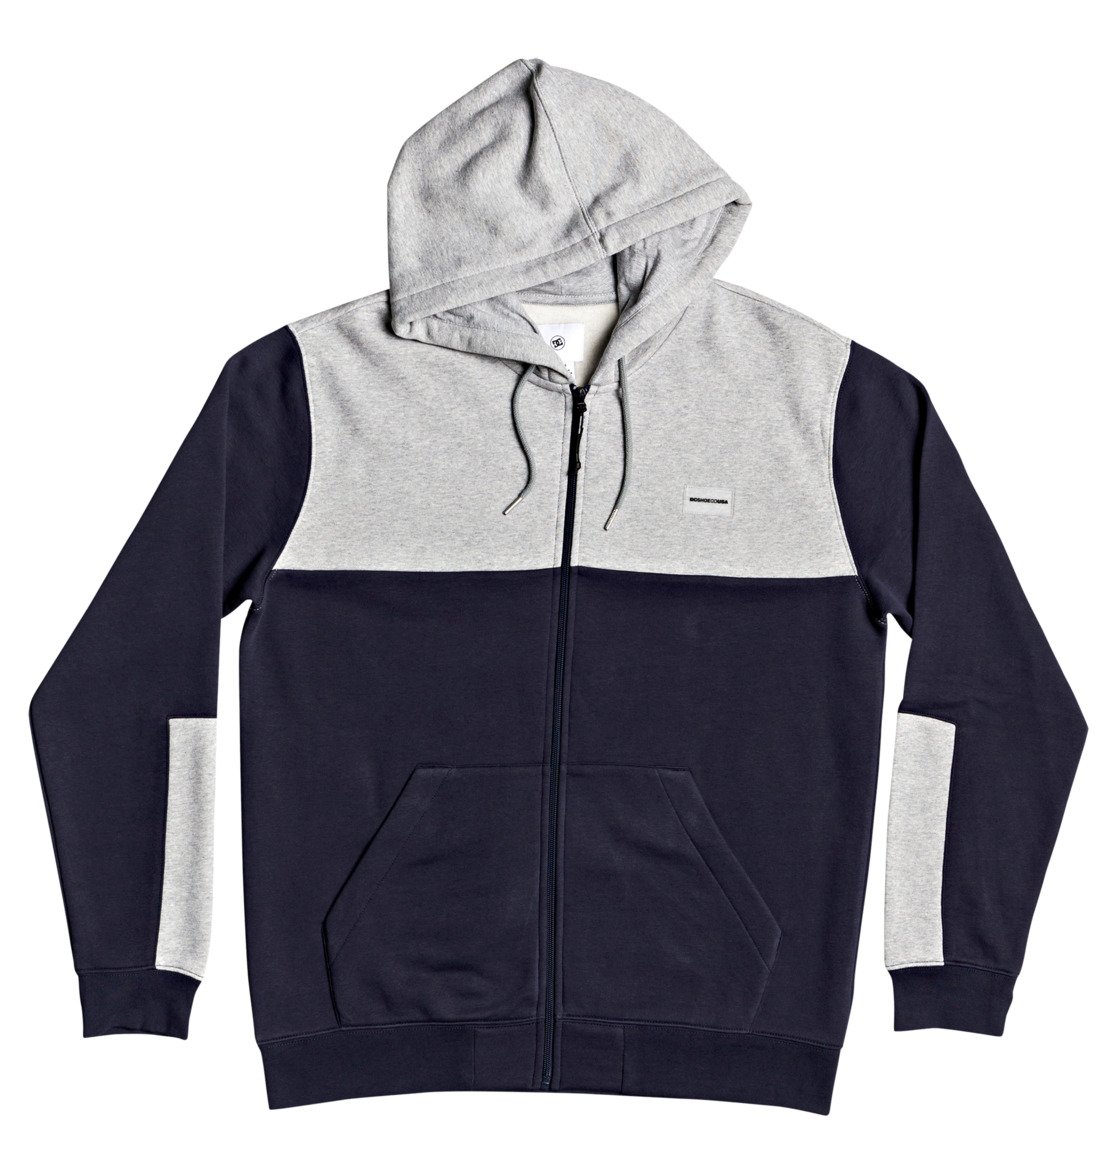 DC Shoes Sweatjacke »Downing« von DC Shoes